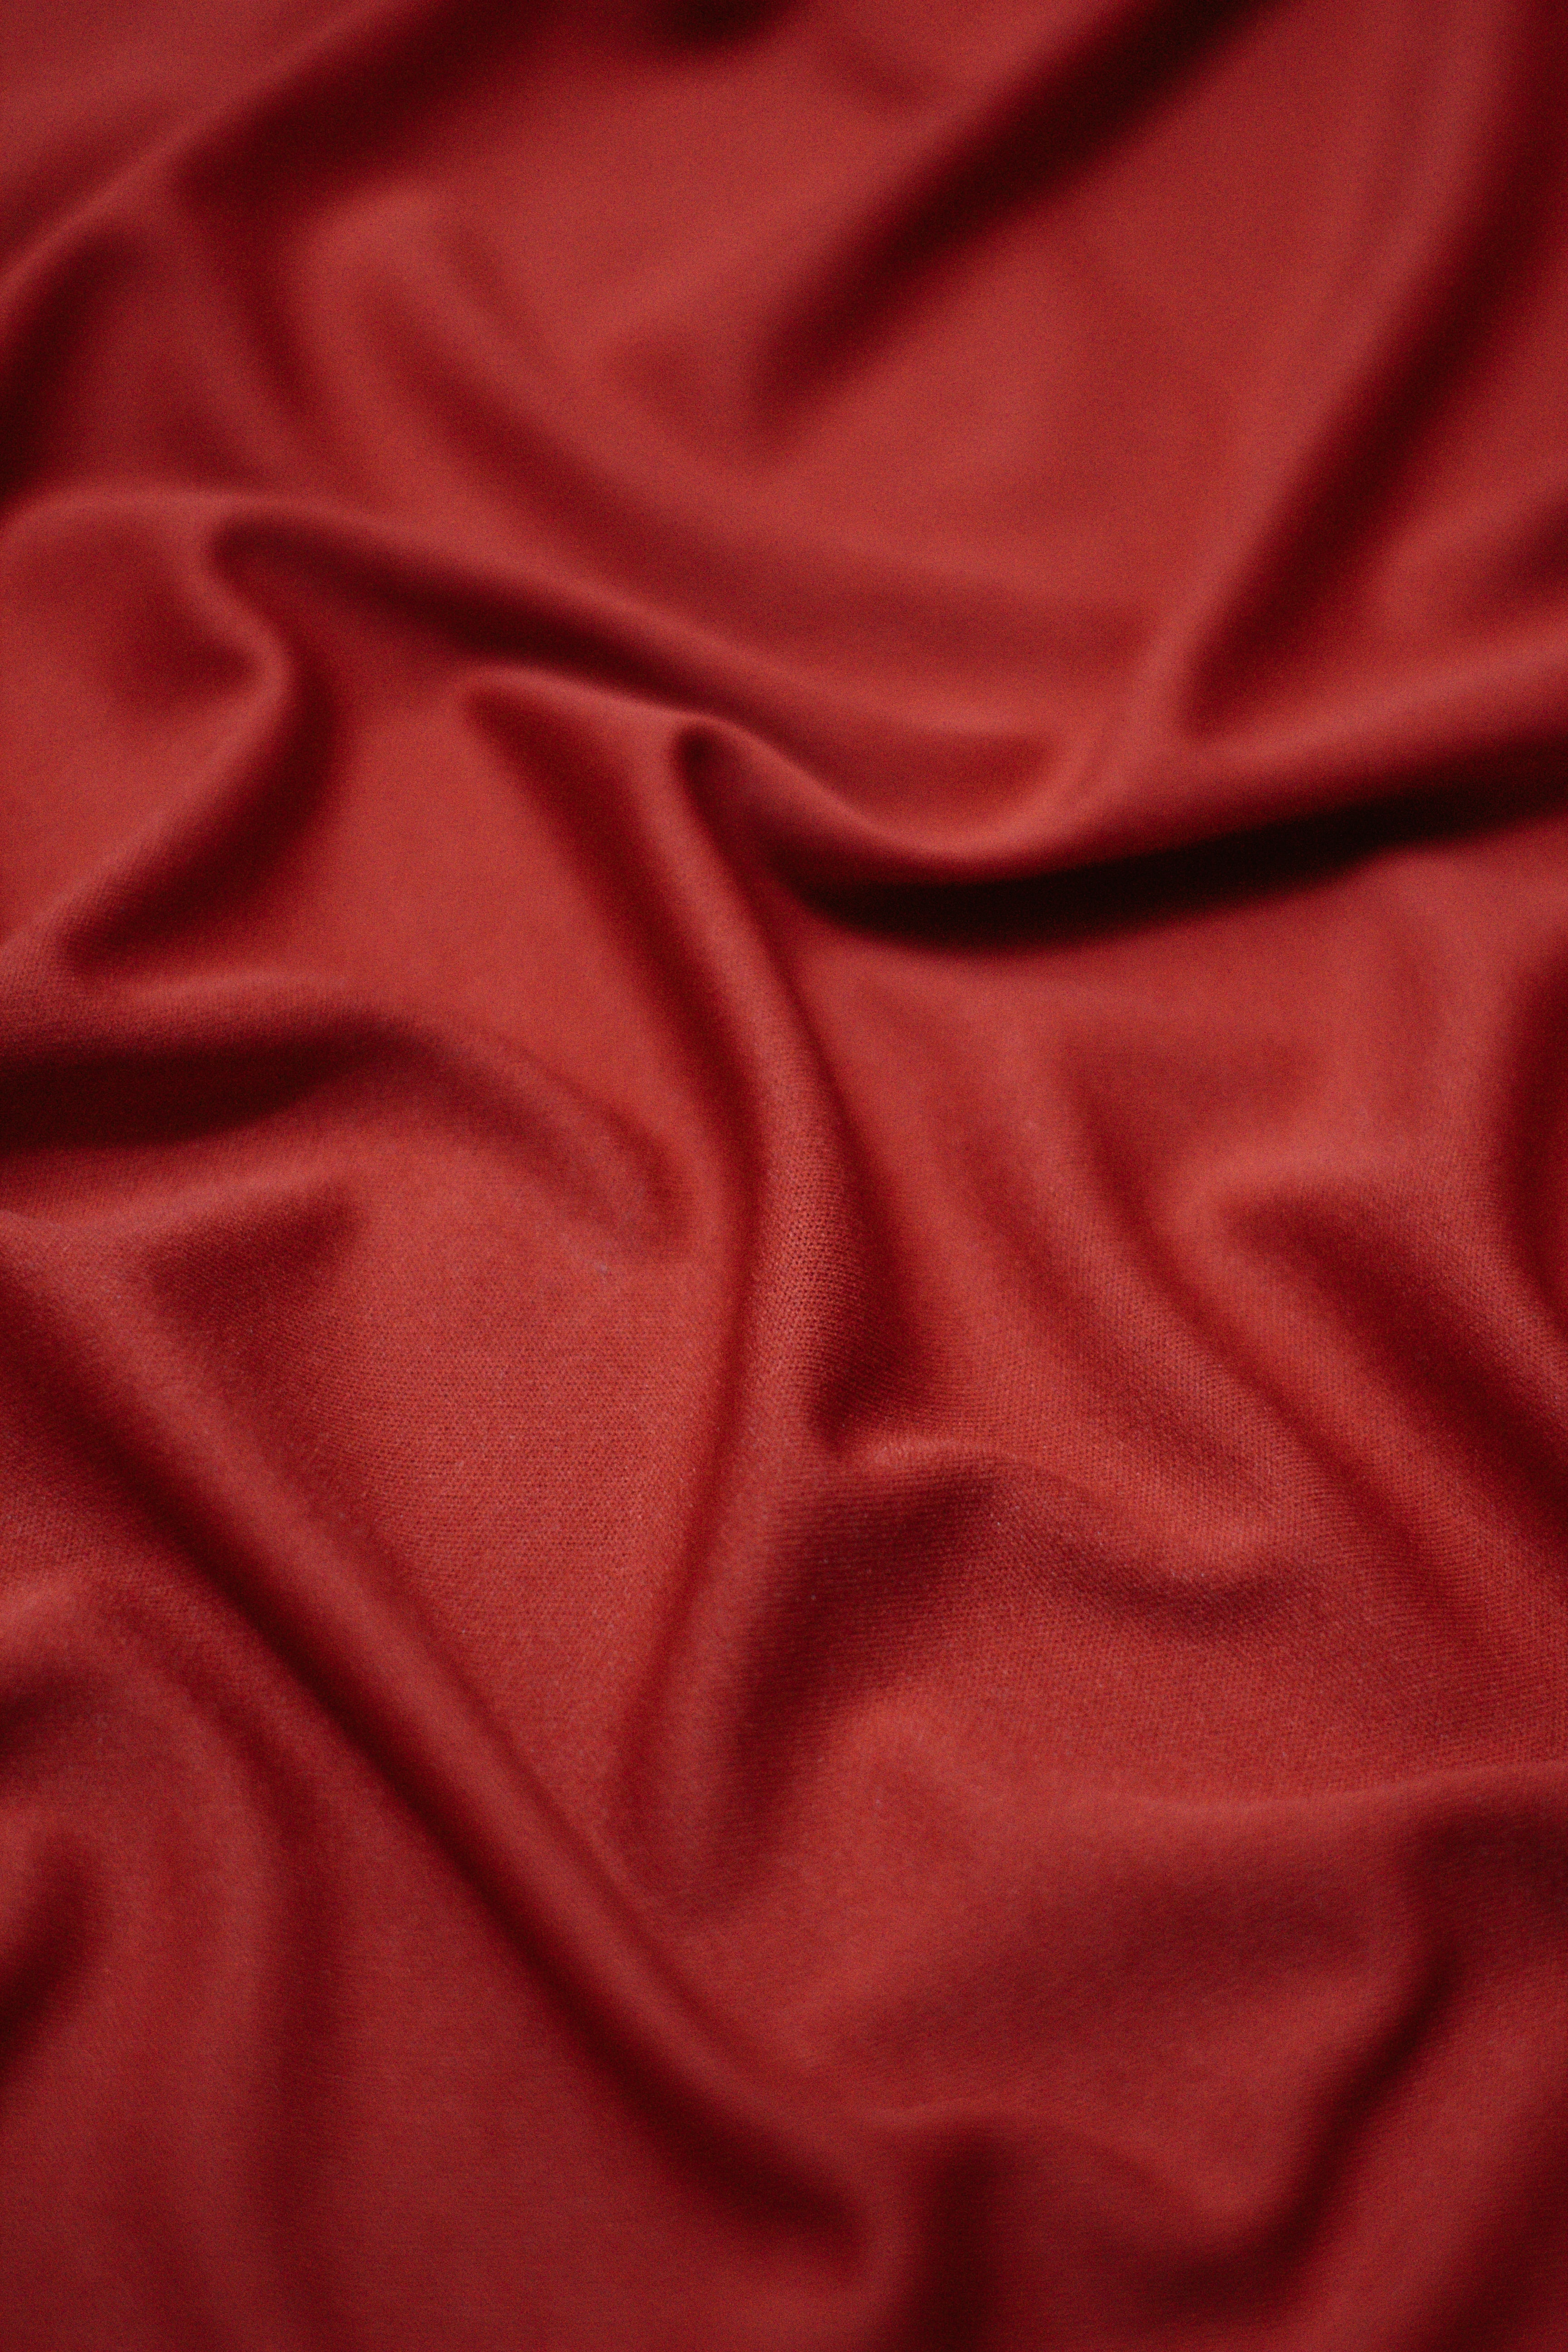 textures, red, texture, cloth, folds, pleating lock screen backgrounds